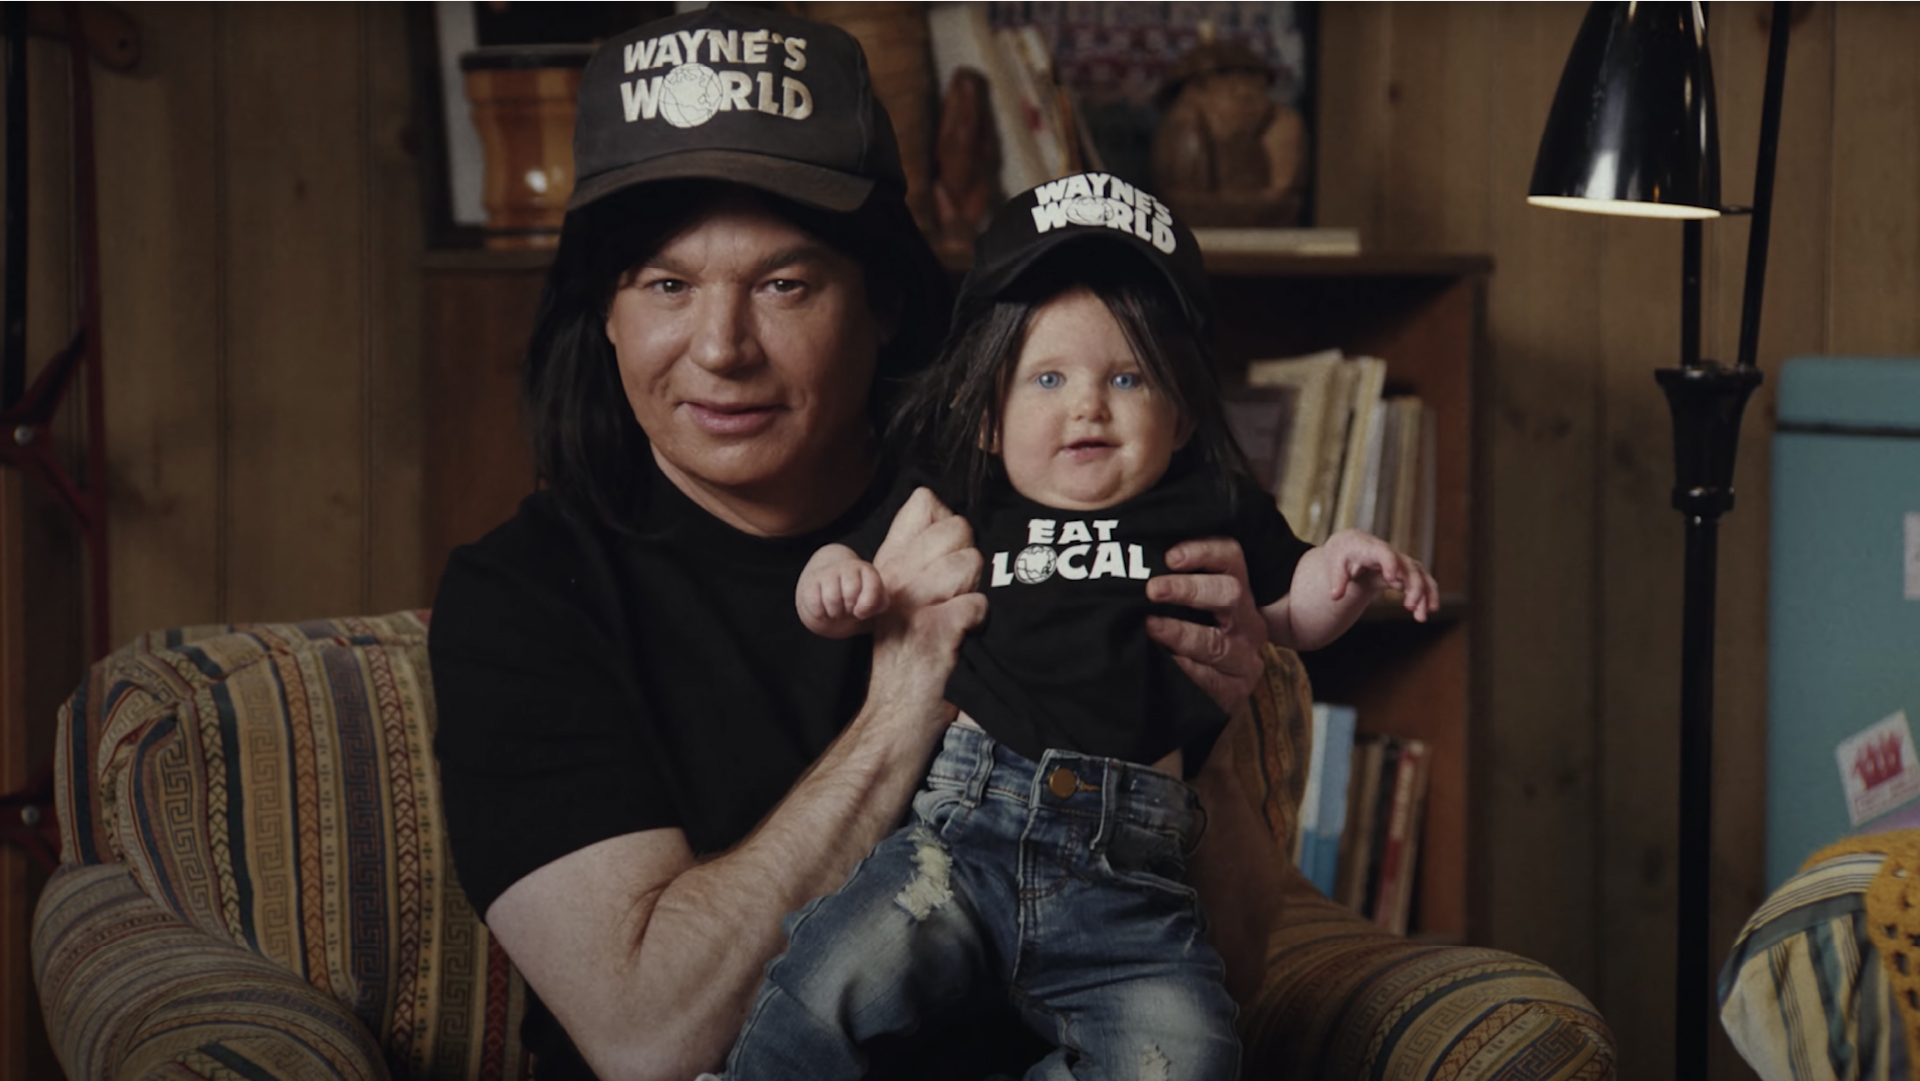 Wayne of Wayne's World holding a baby in Uber Eats Super Bowl commercial